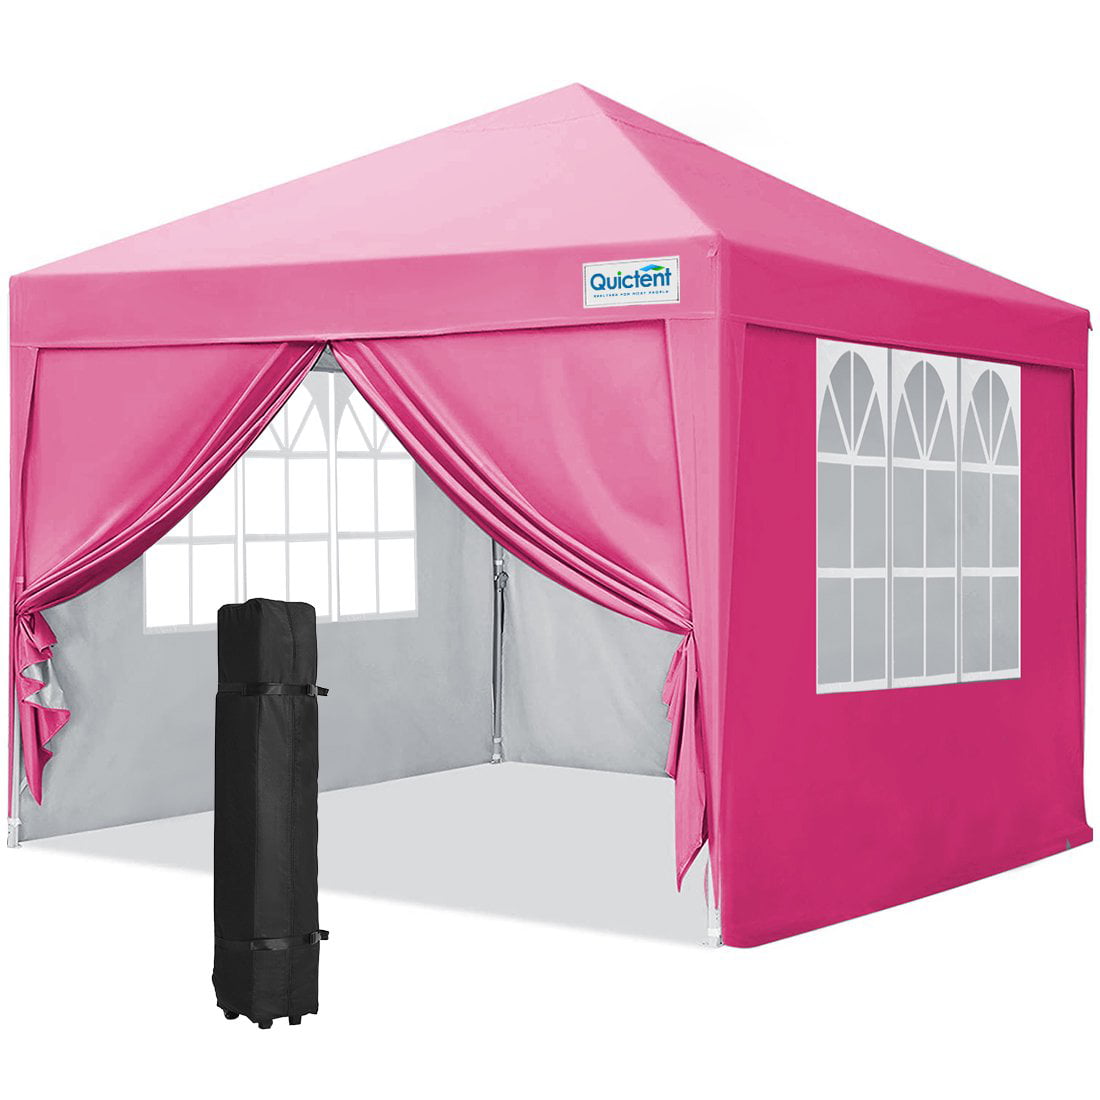 COBIZI 10'x10' Pop Up Instant Waterproof Canopy Tent with 4 Walls & Ground Nail 